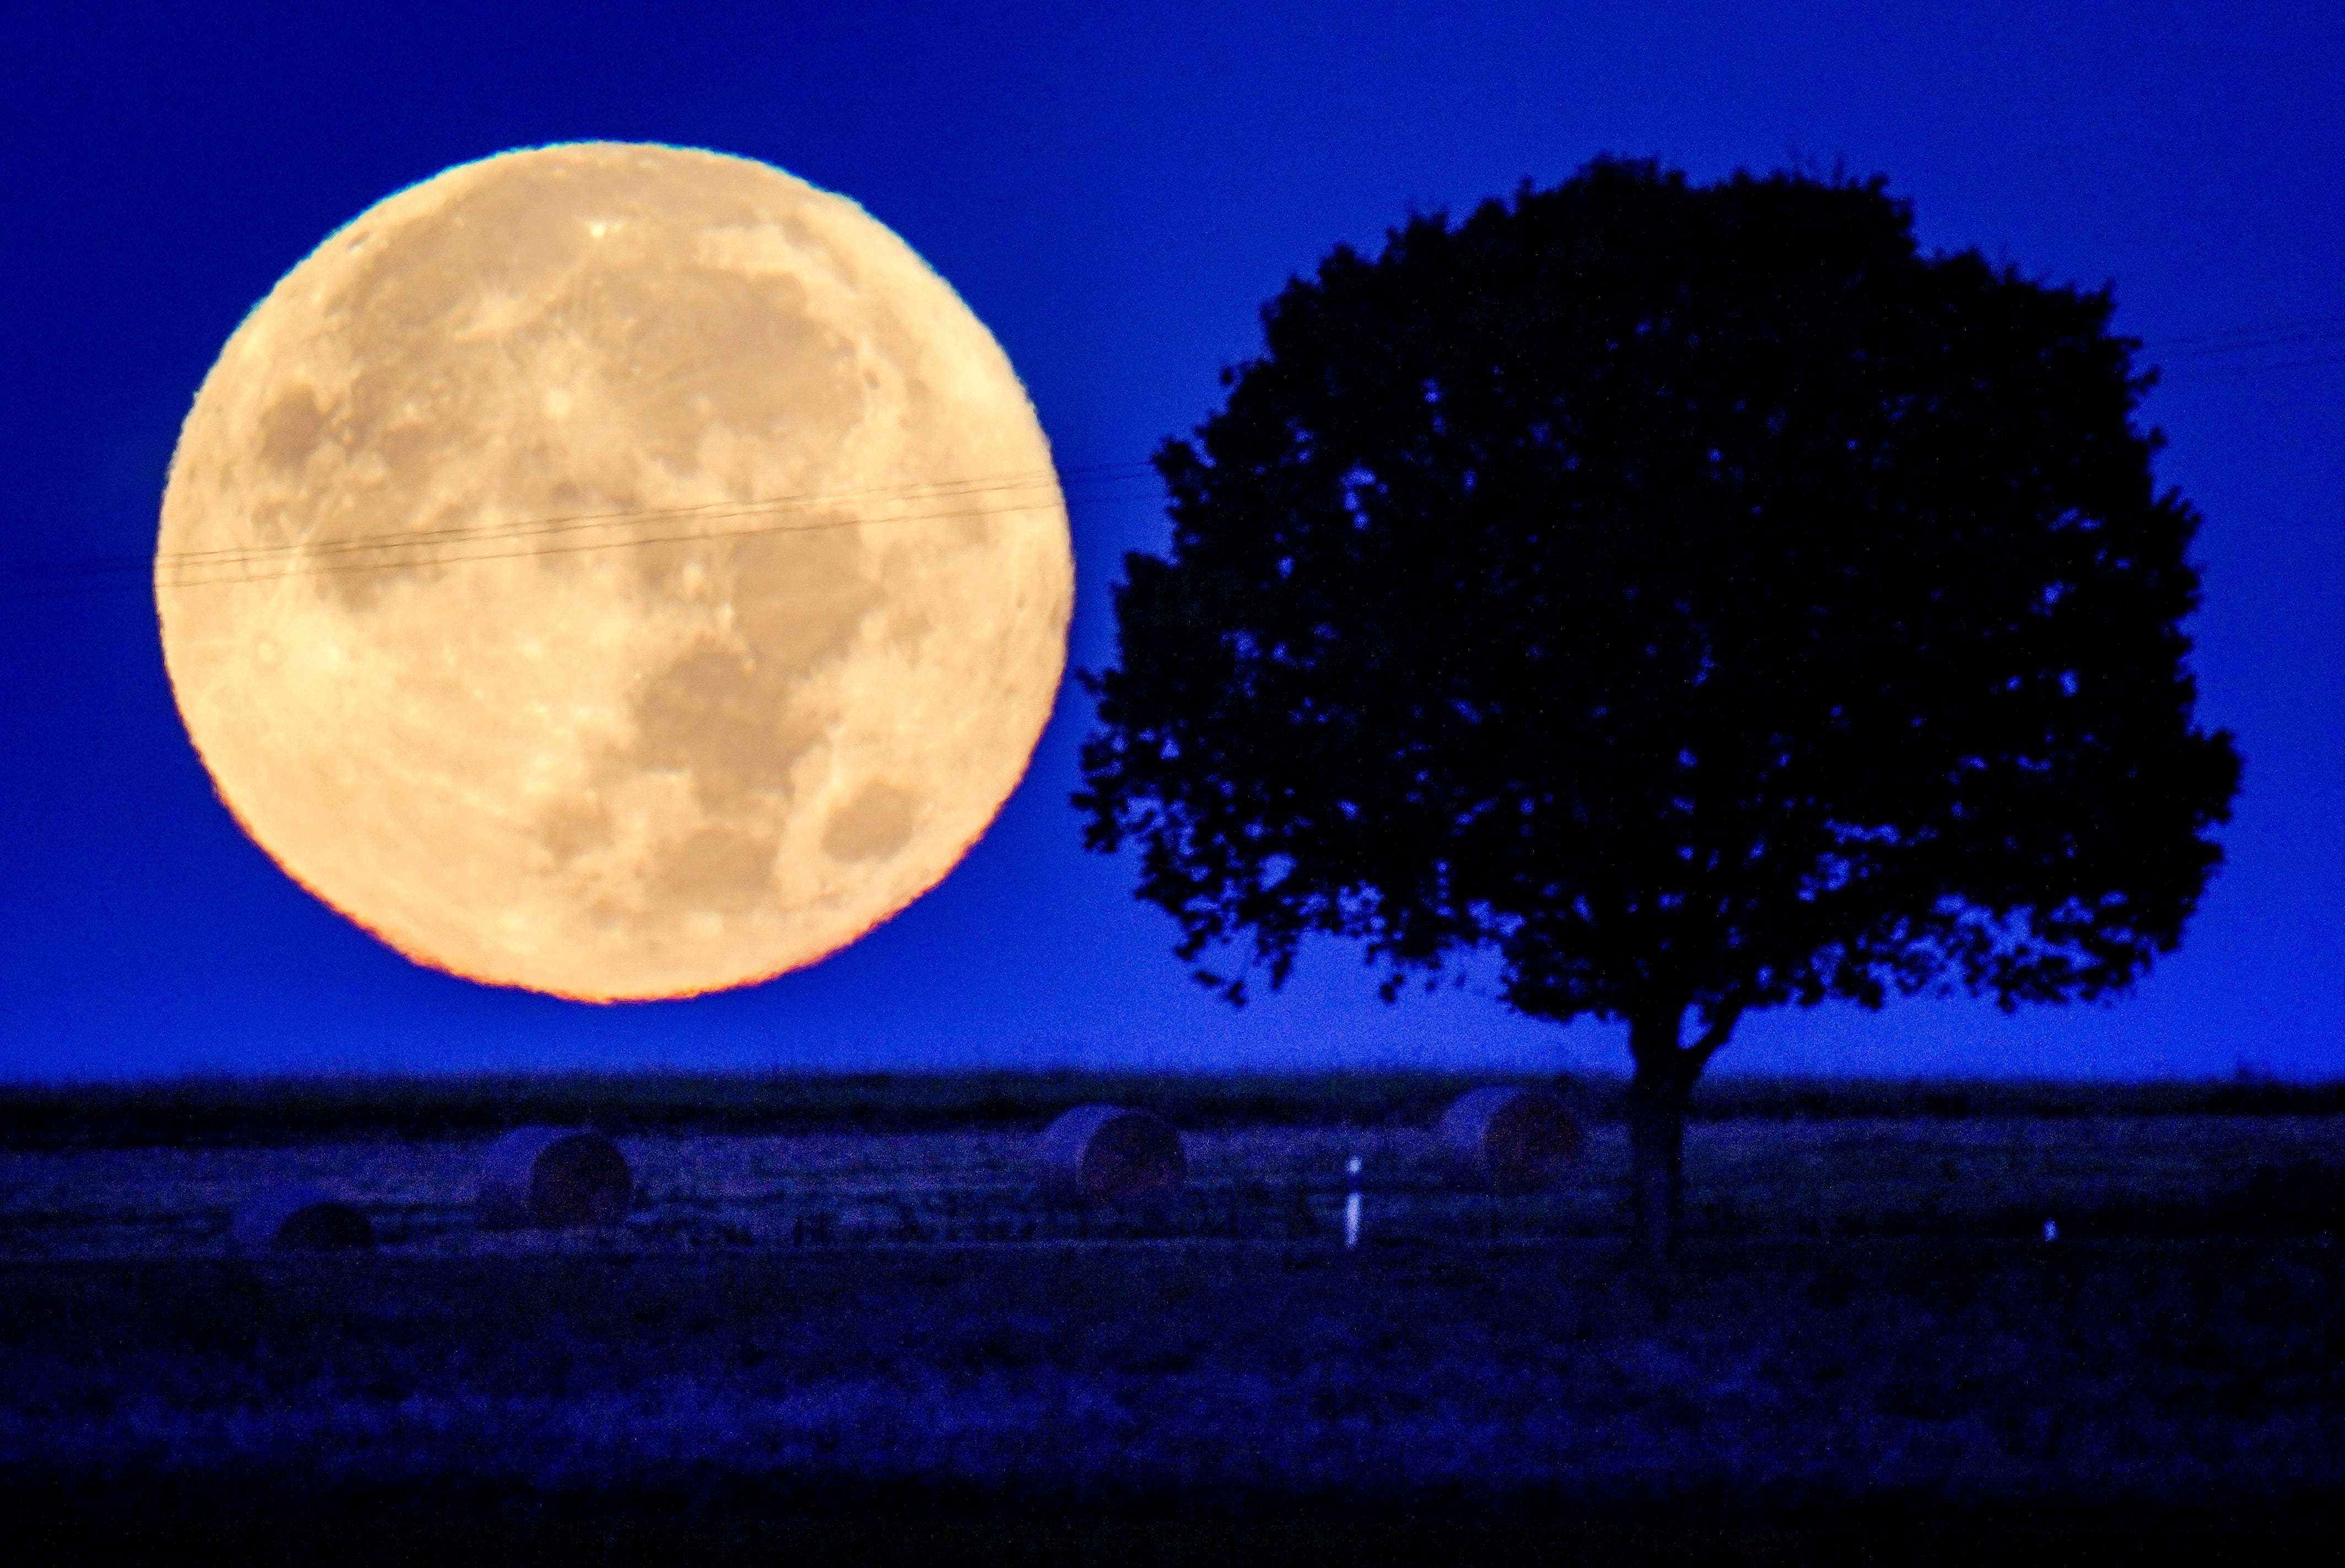 There is a full worm moon rising tonight Here’s when you can see it